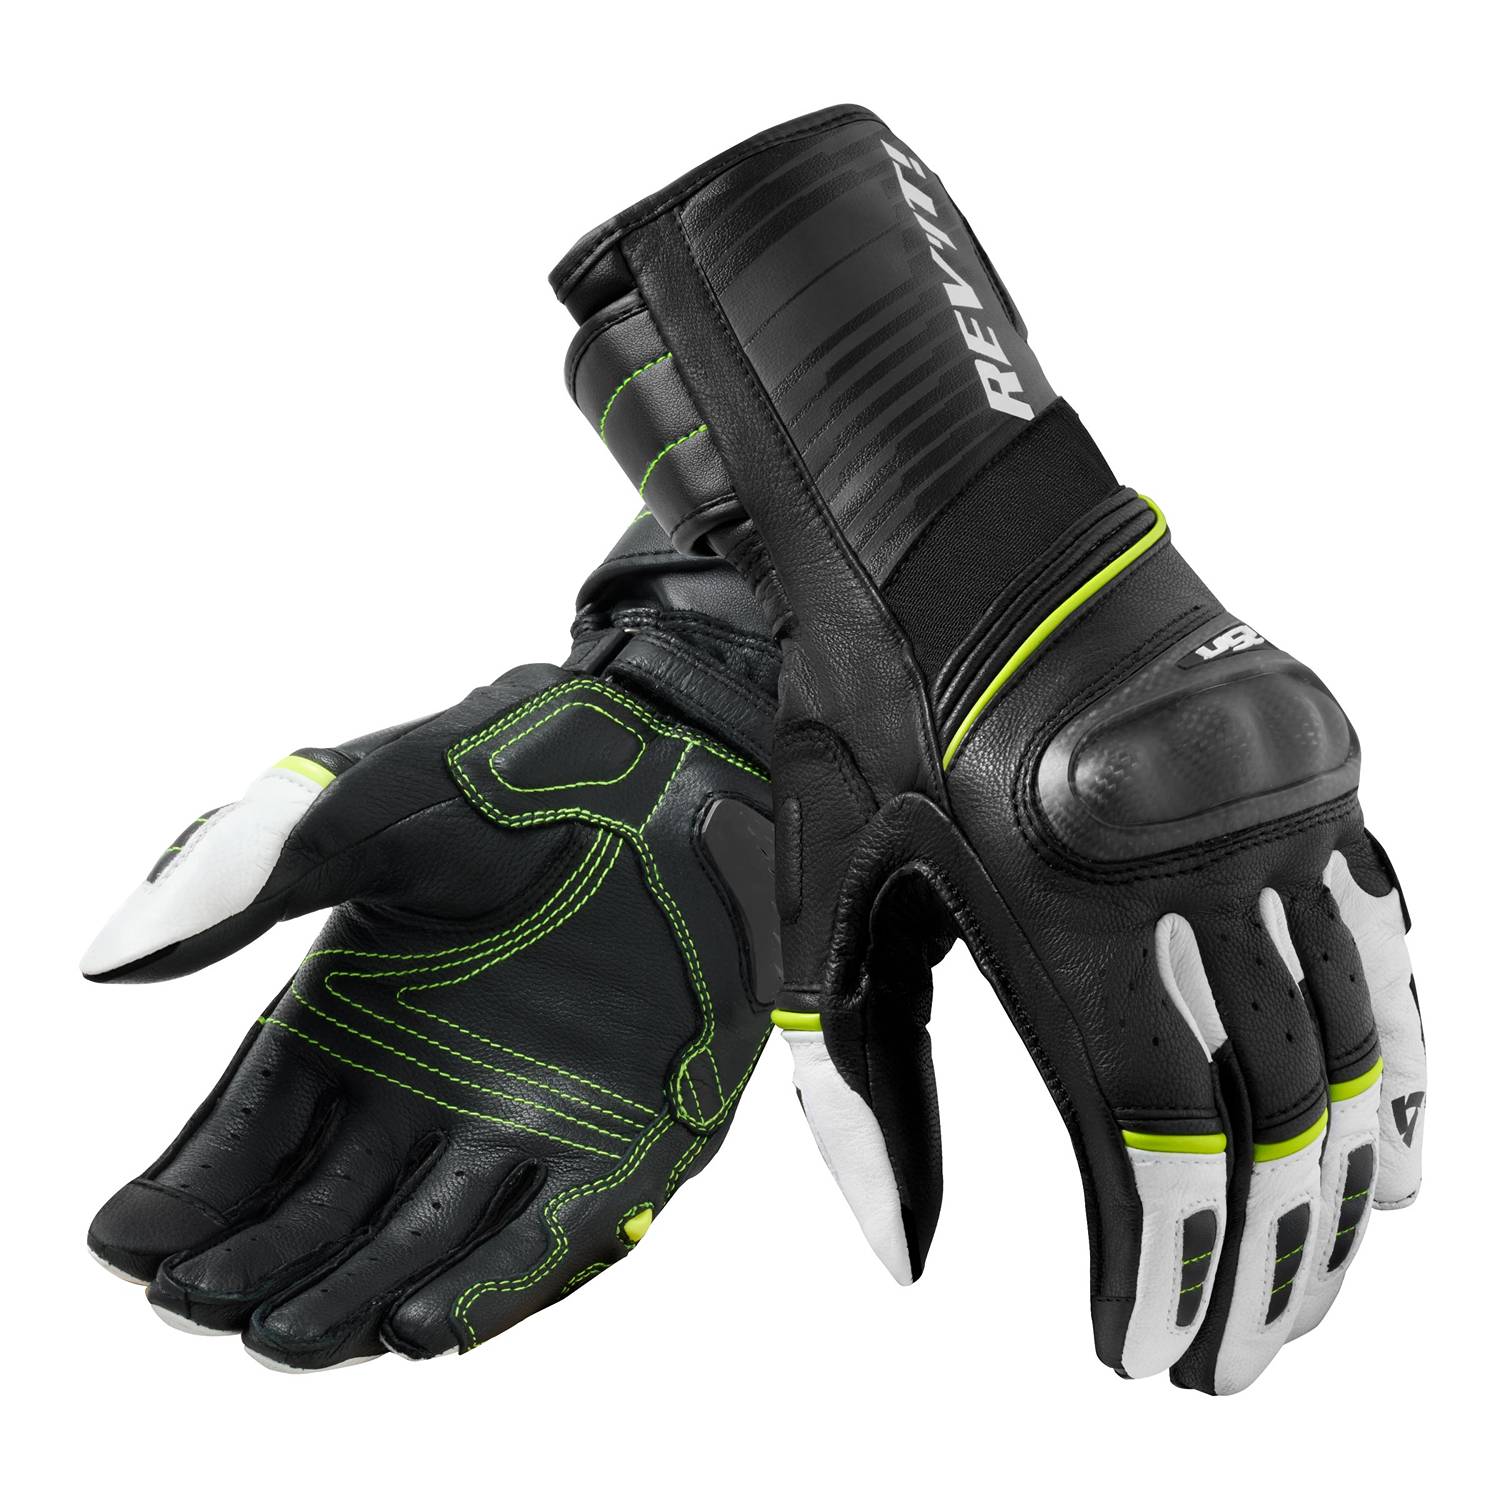 Image of REV'IT! RSR 4 Black Gloves Neon Yellow Size 3XL ID 8700001306843